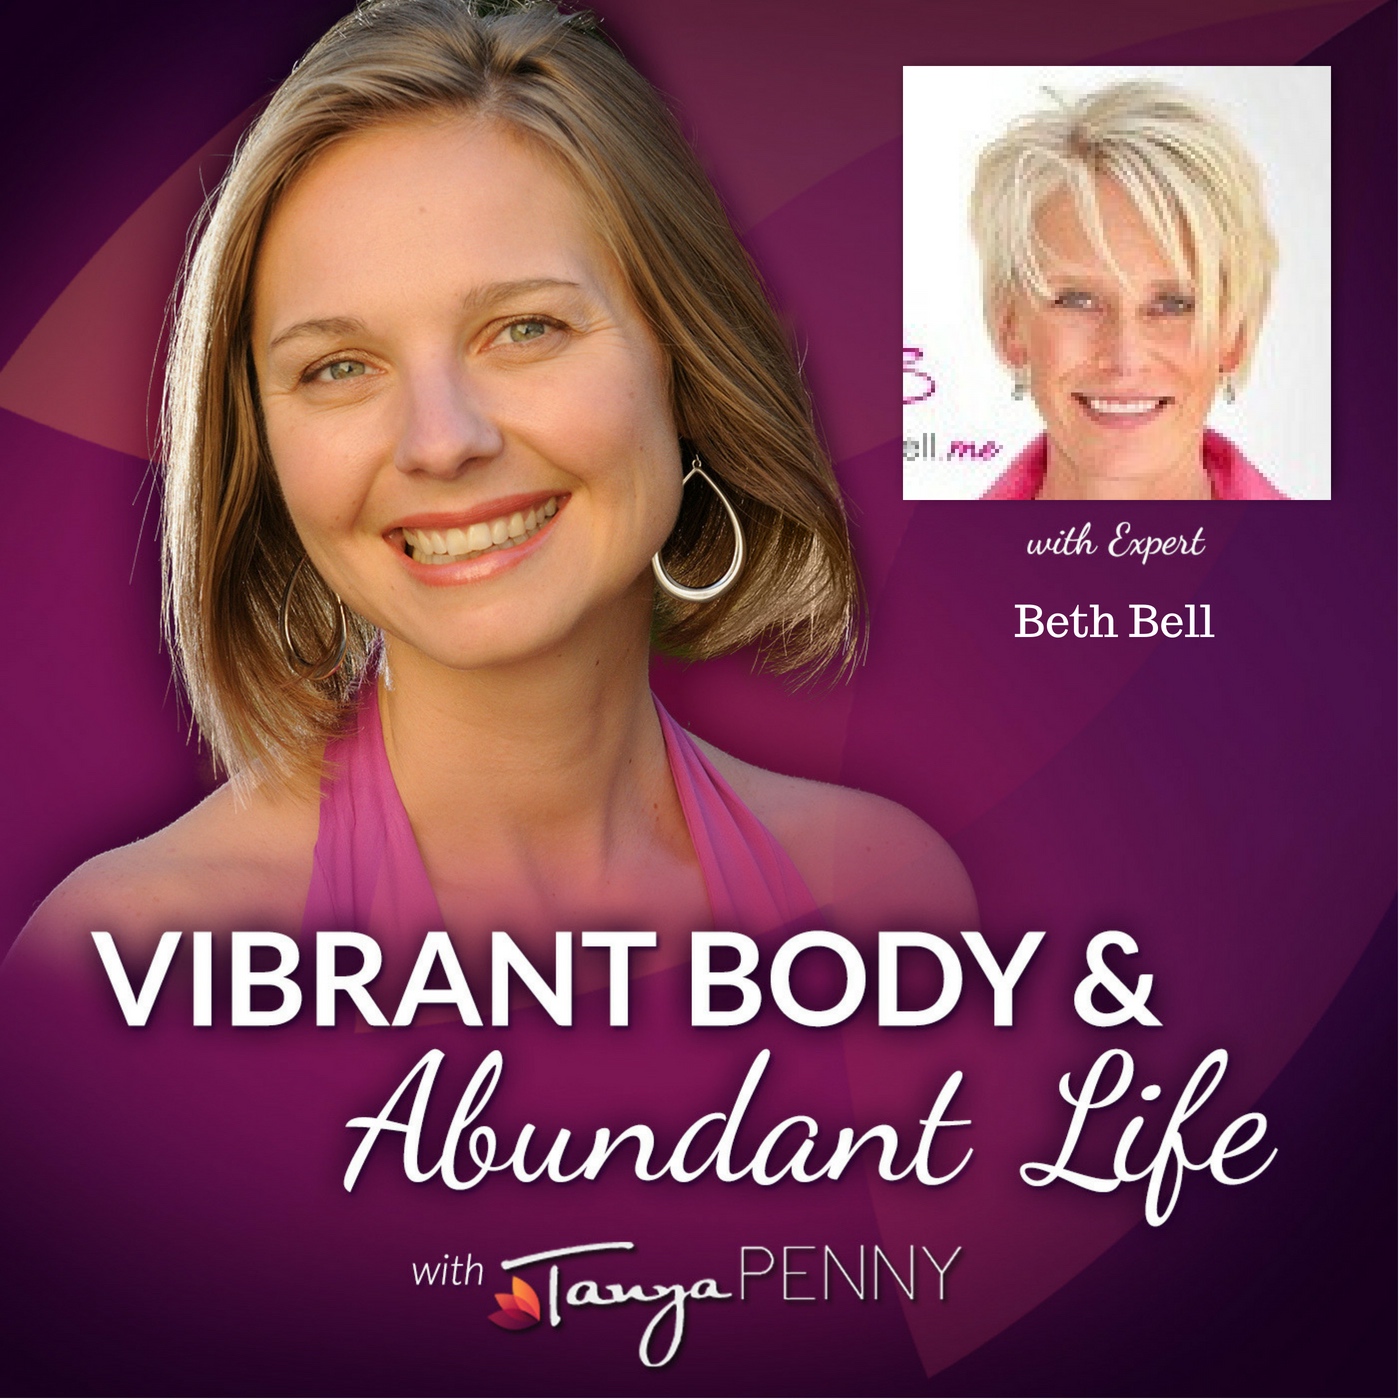 Trust Yourself with Beth Bell